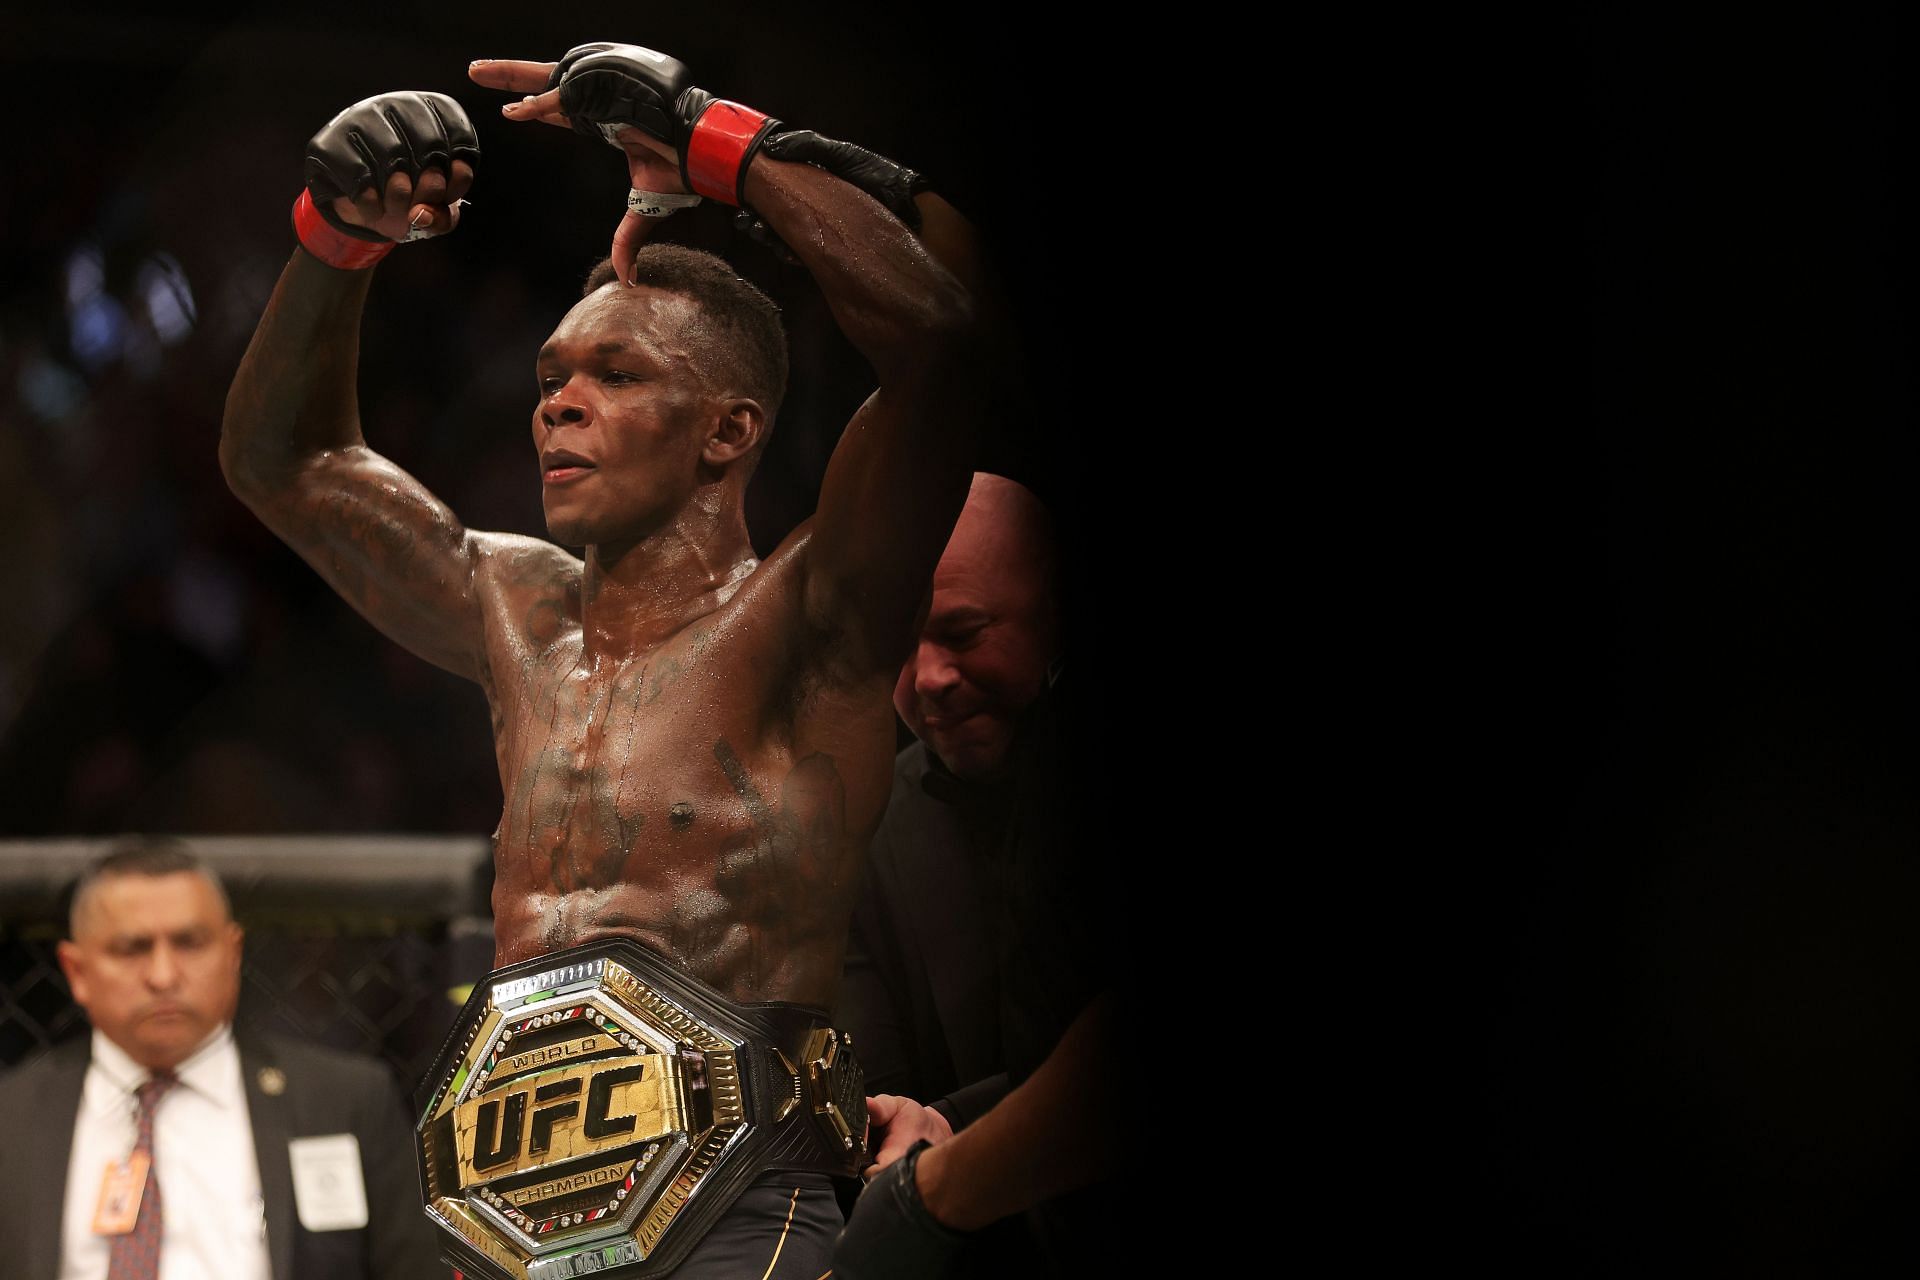 It&#039;s arguable that Israel Adesanya has already cleaned out the middleweight division